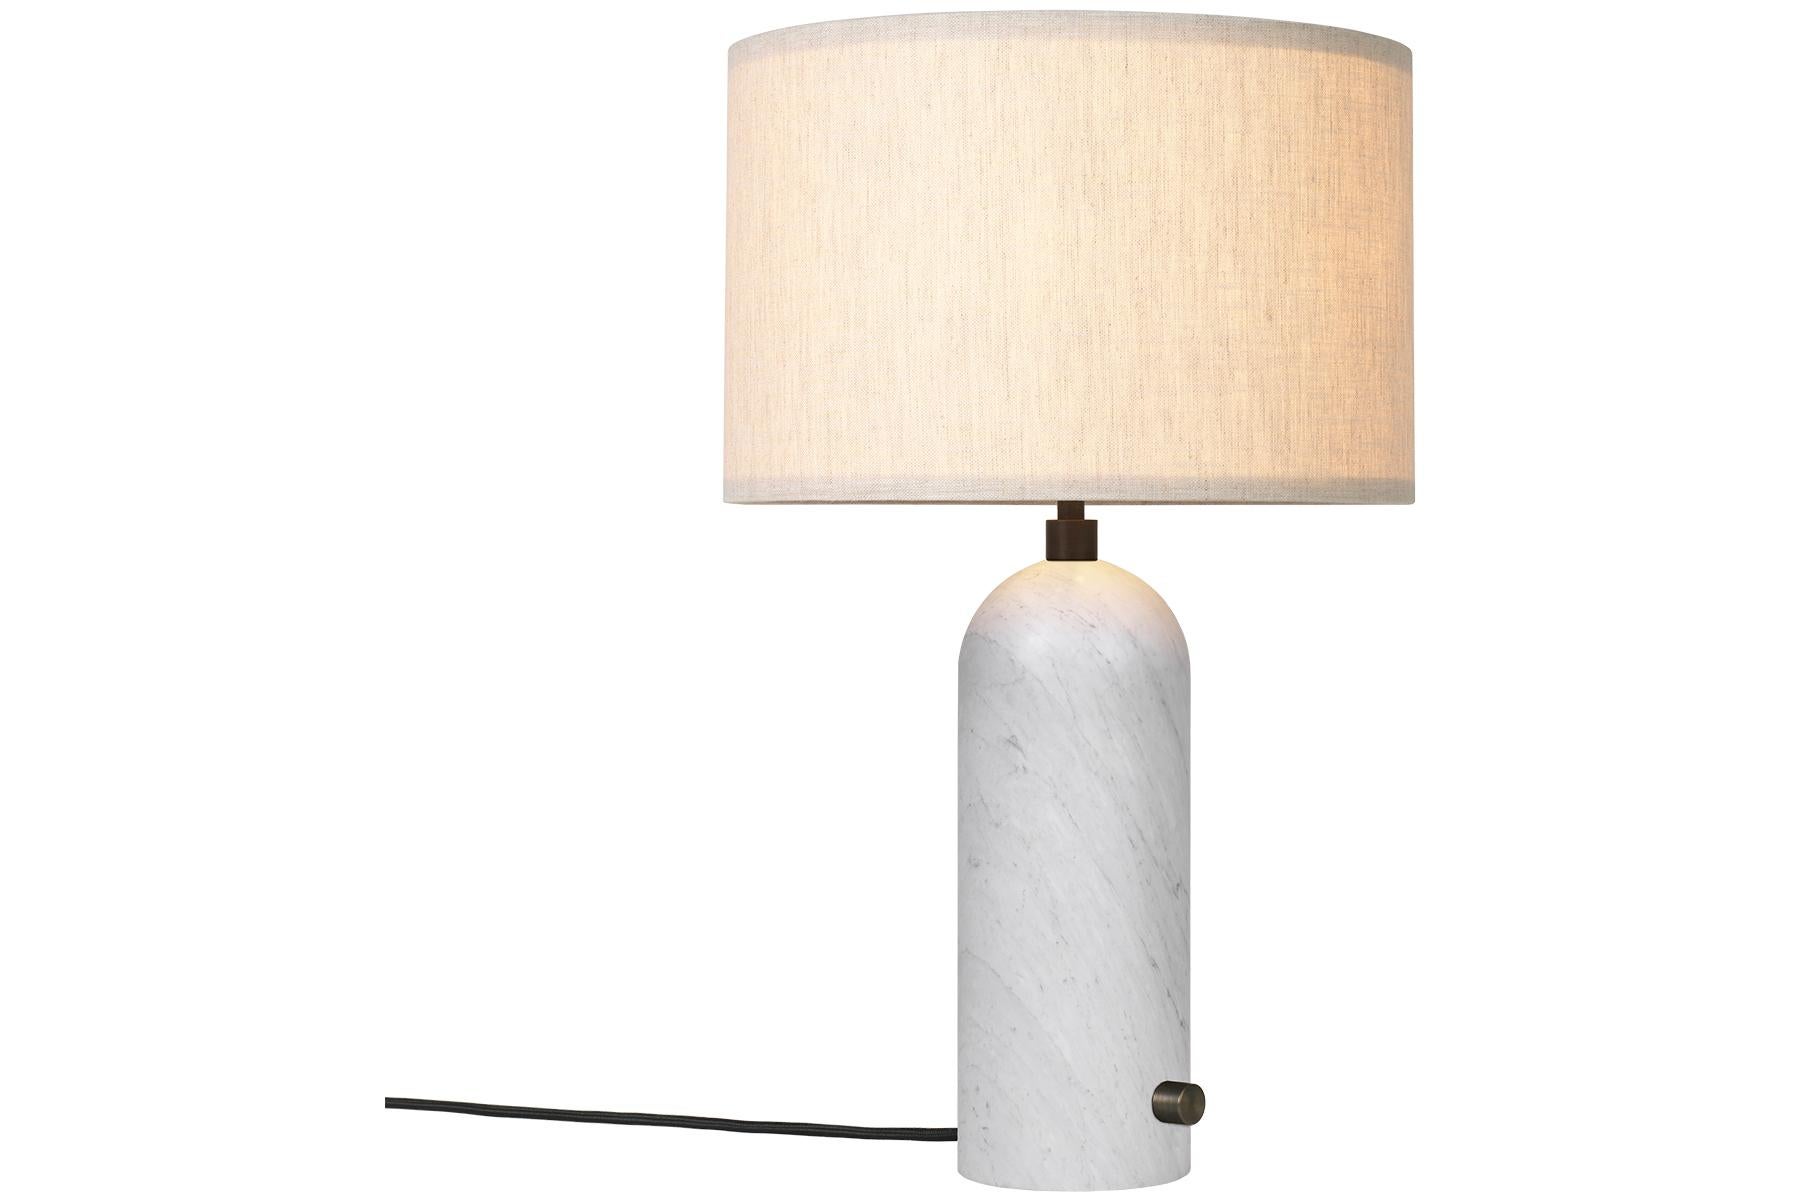 Gravity Table Lamp - Small, Grey Marble, White. For Sale 9